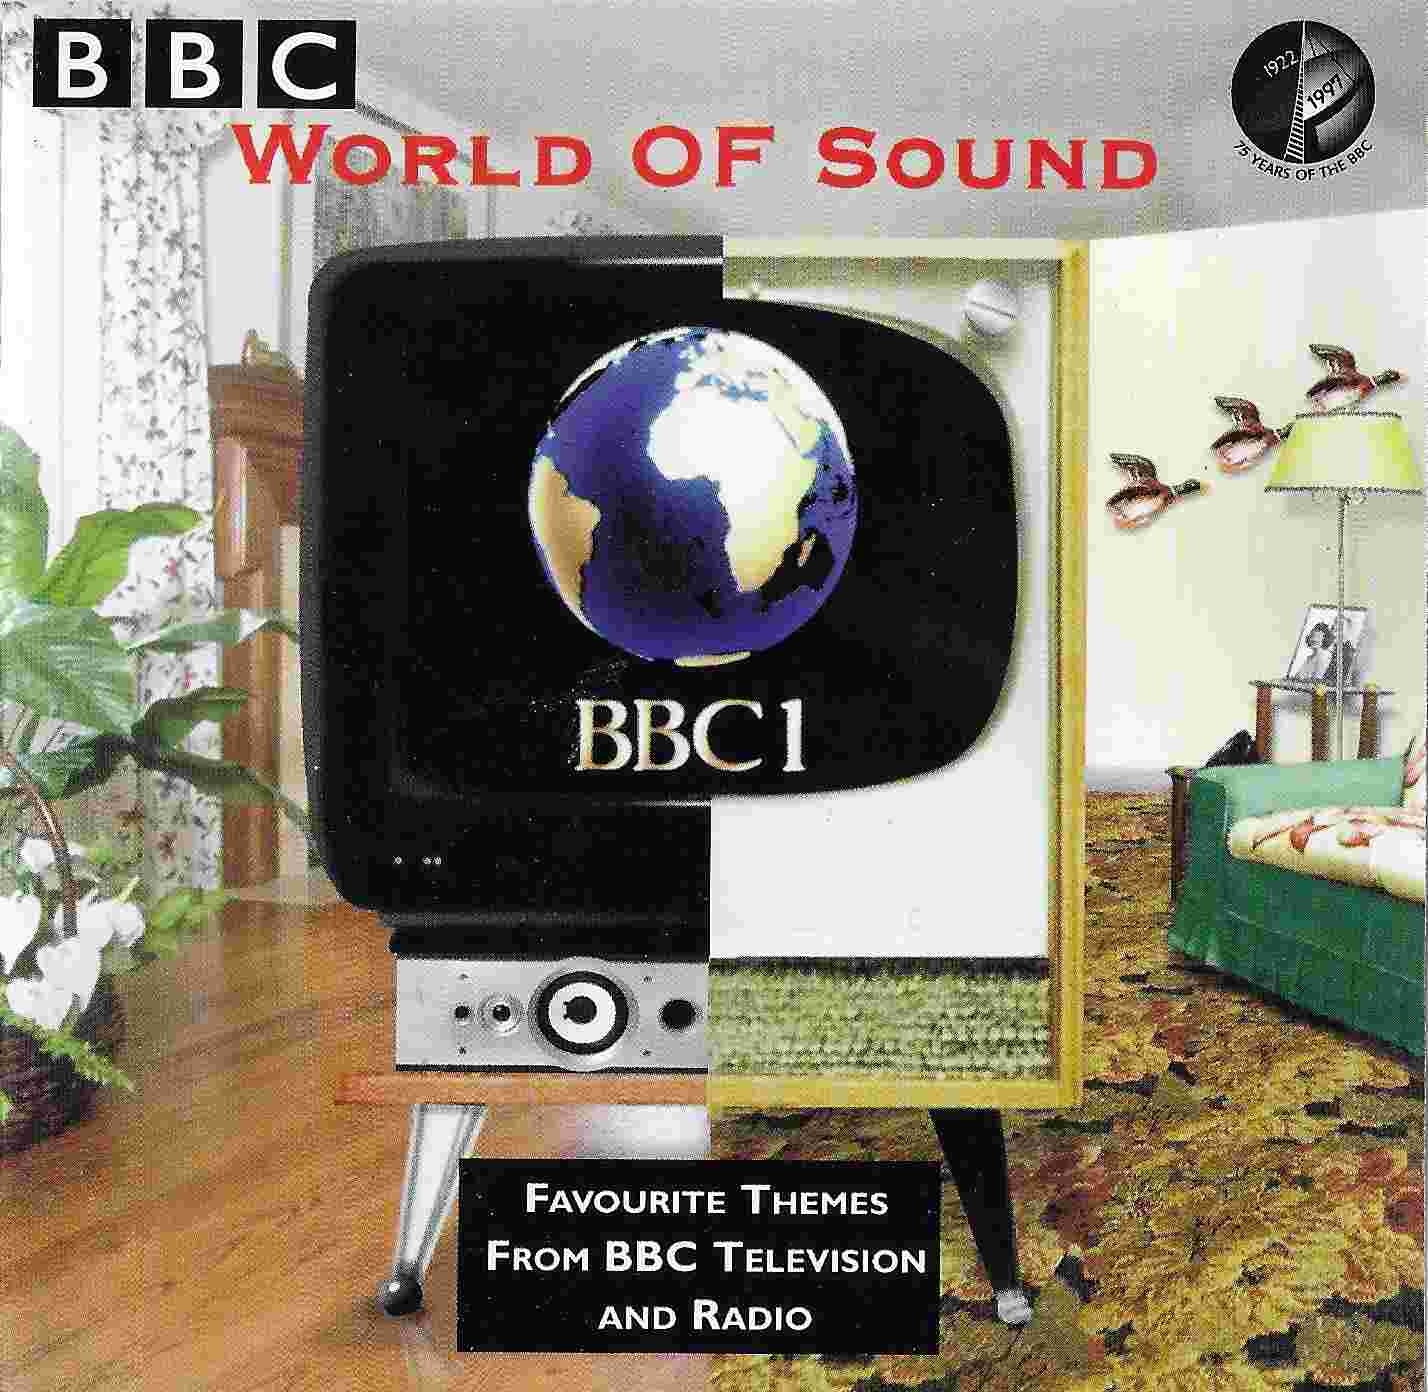 Picture of CD 33635-2 World of sound - Favourite themes from BBC television and radio by artist Various from the BBC cds - Records and Tapes library